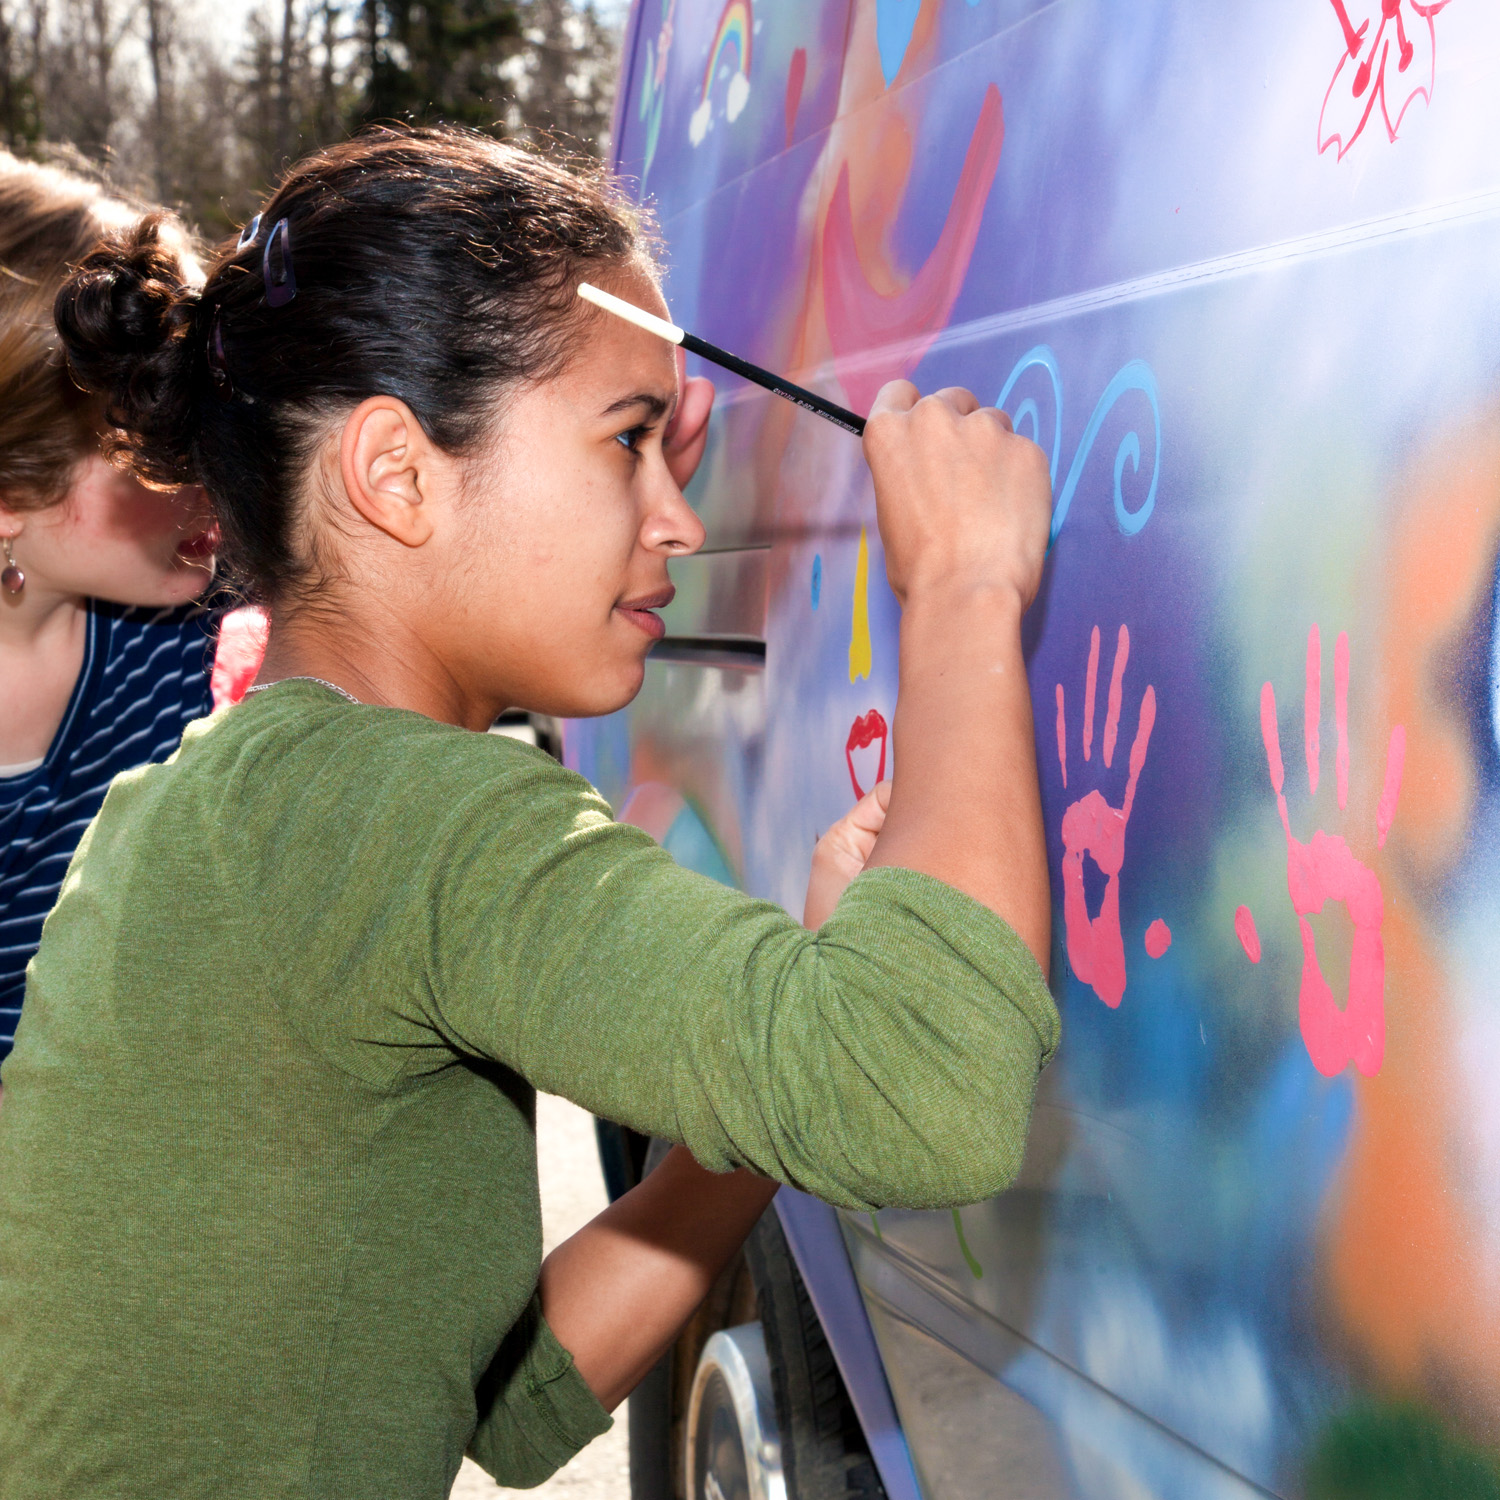 Students painting a van.